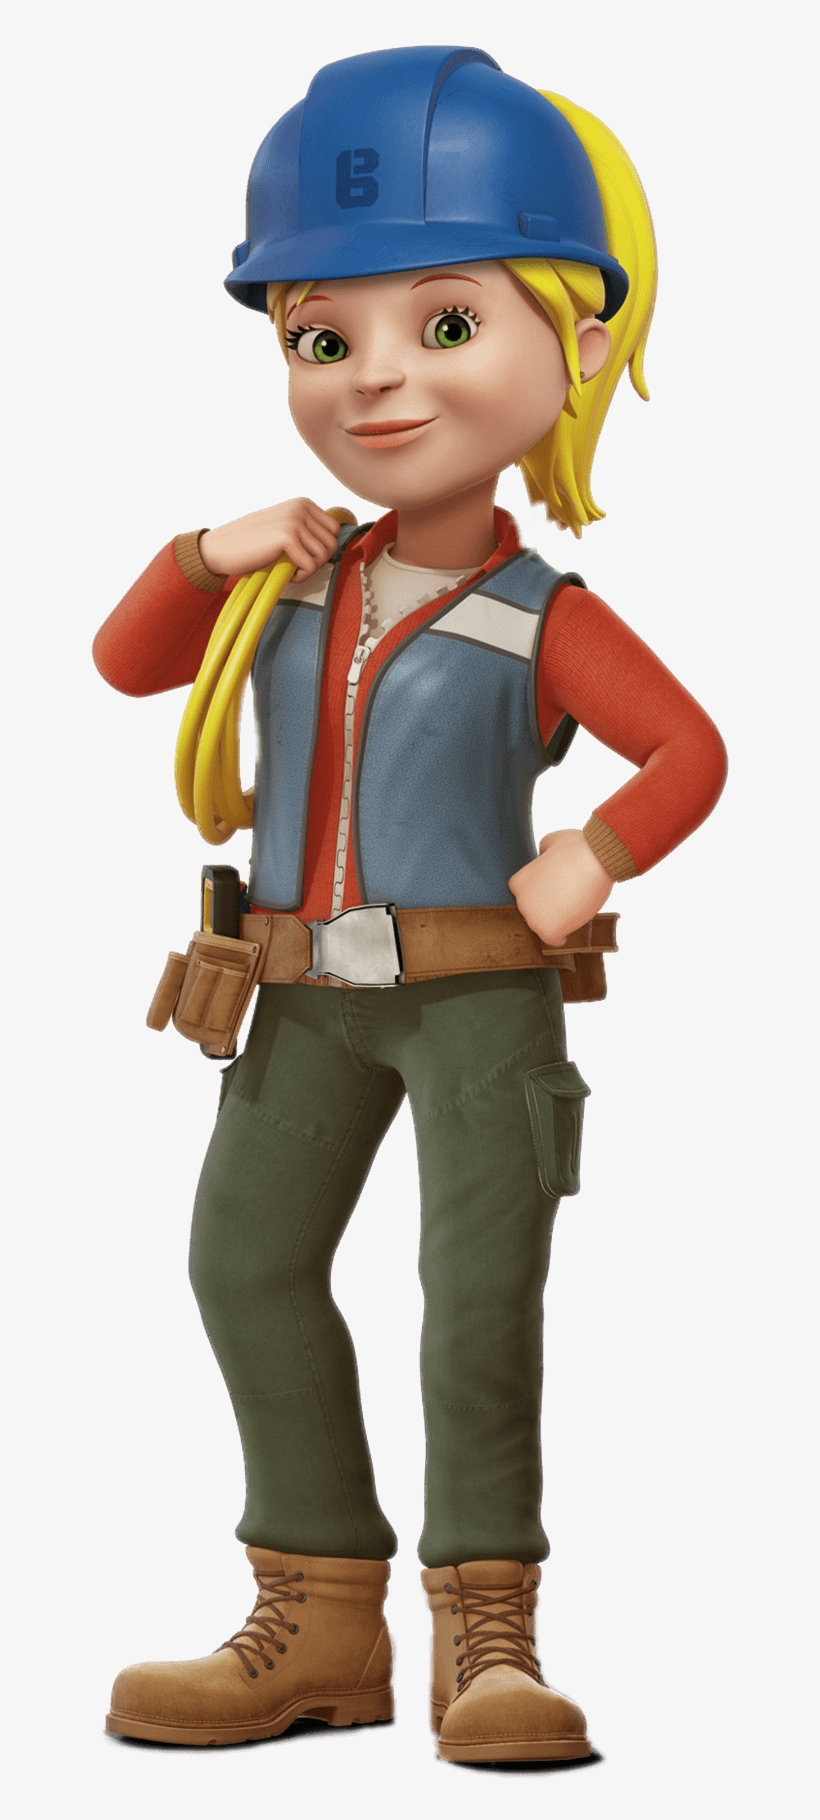 At The Movies - Bob The Builder 2016 Wendy, transparent png #1213352